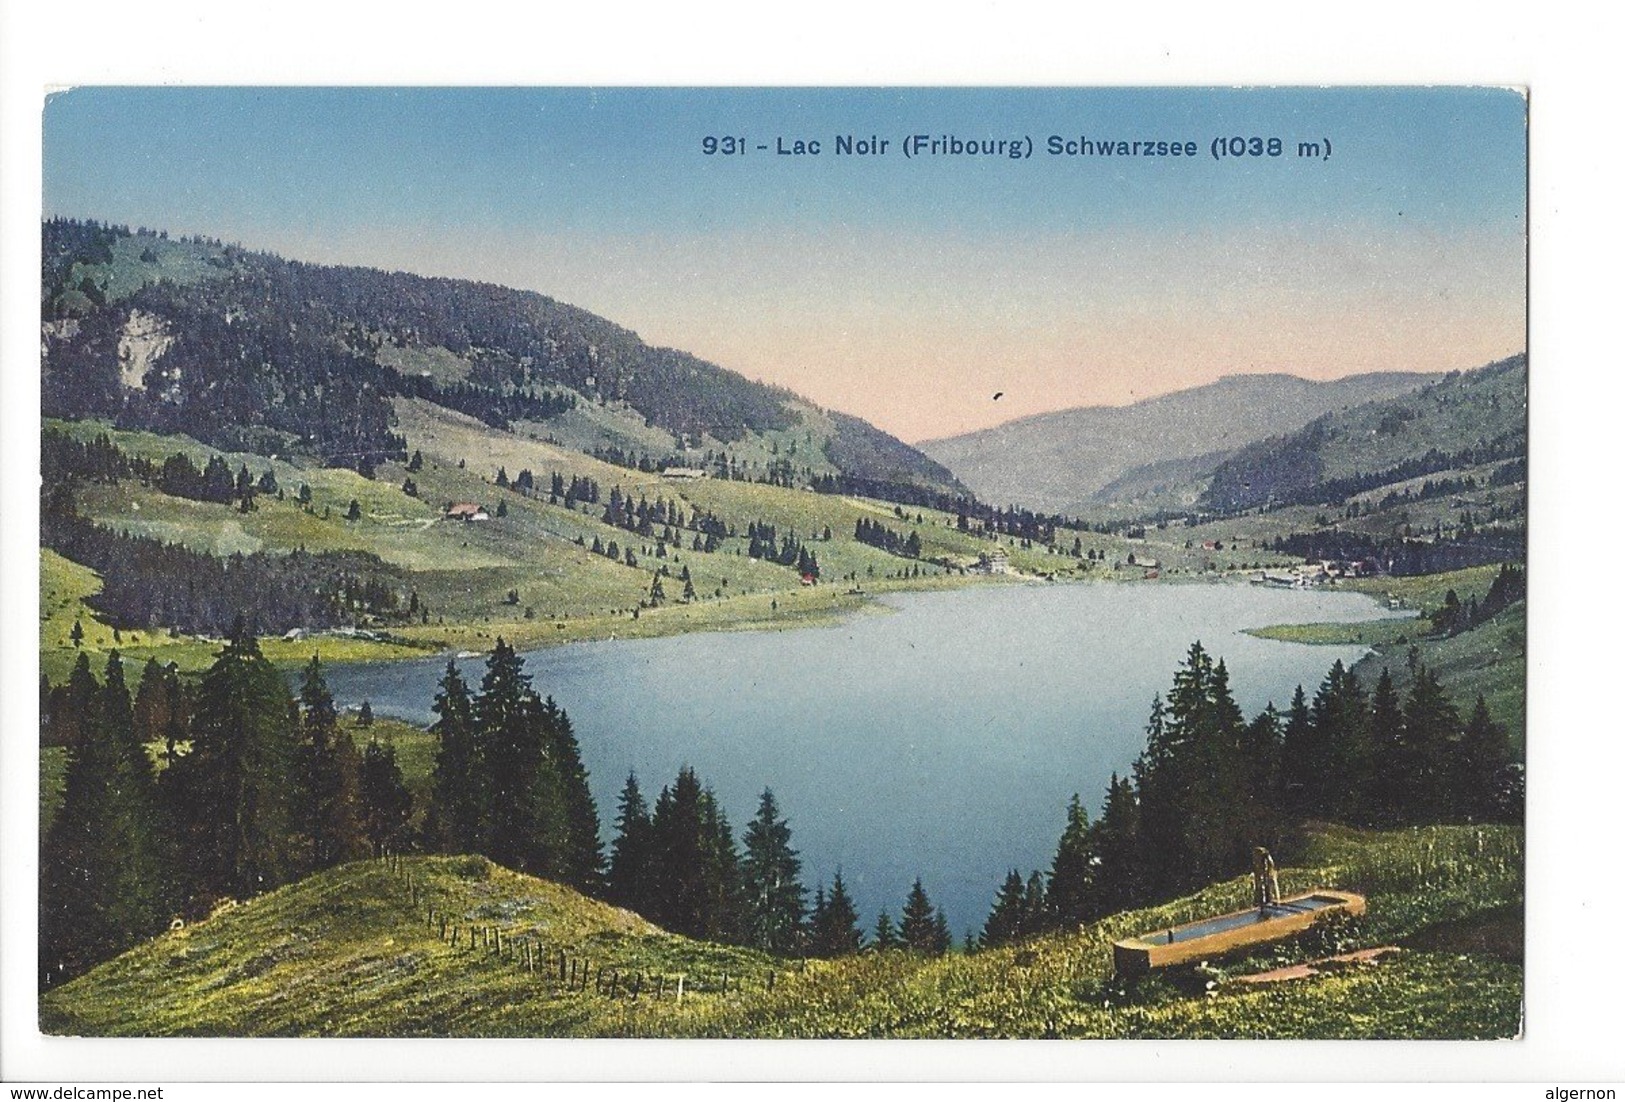 22334 - Lac Noir Fribourg Schwarzsee - Fribourg